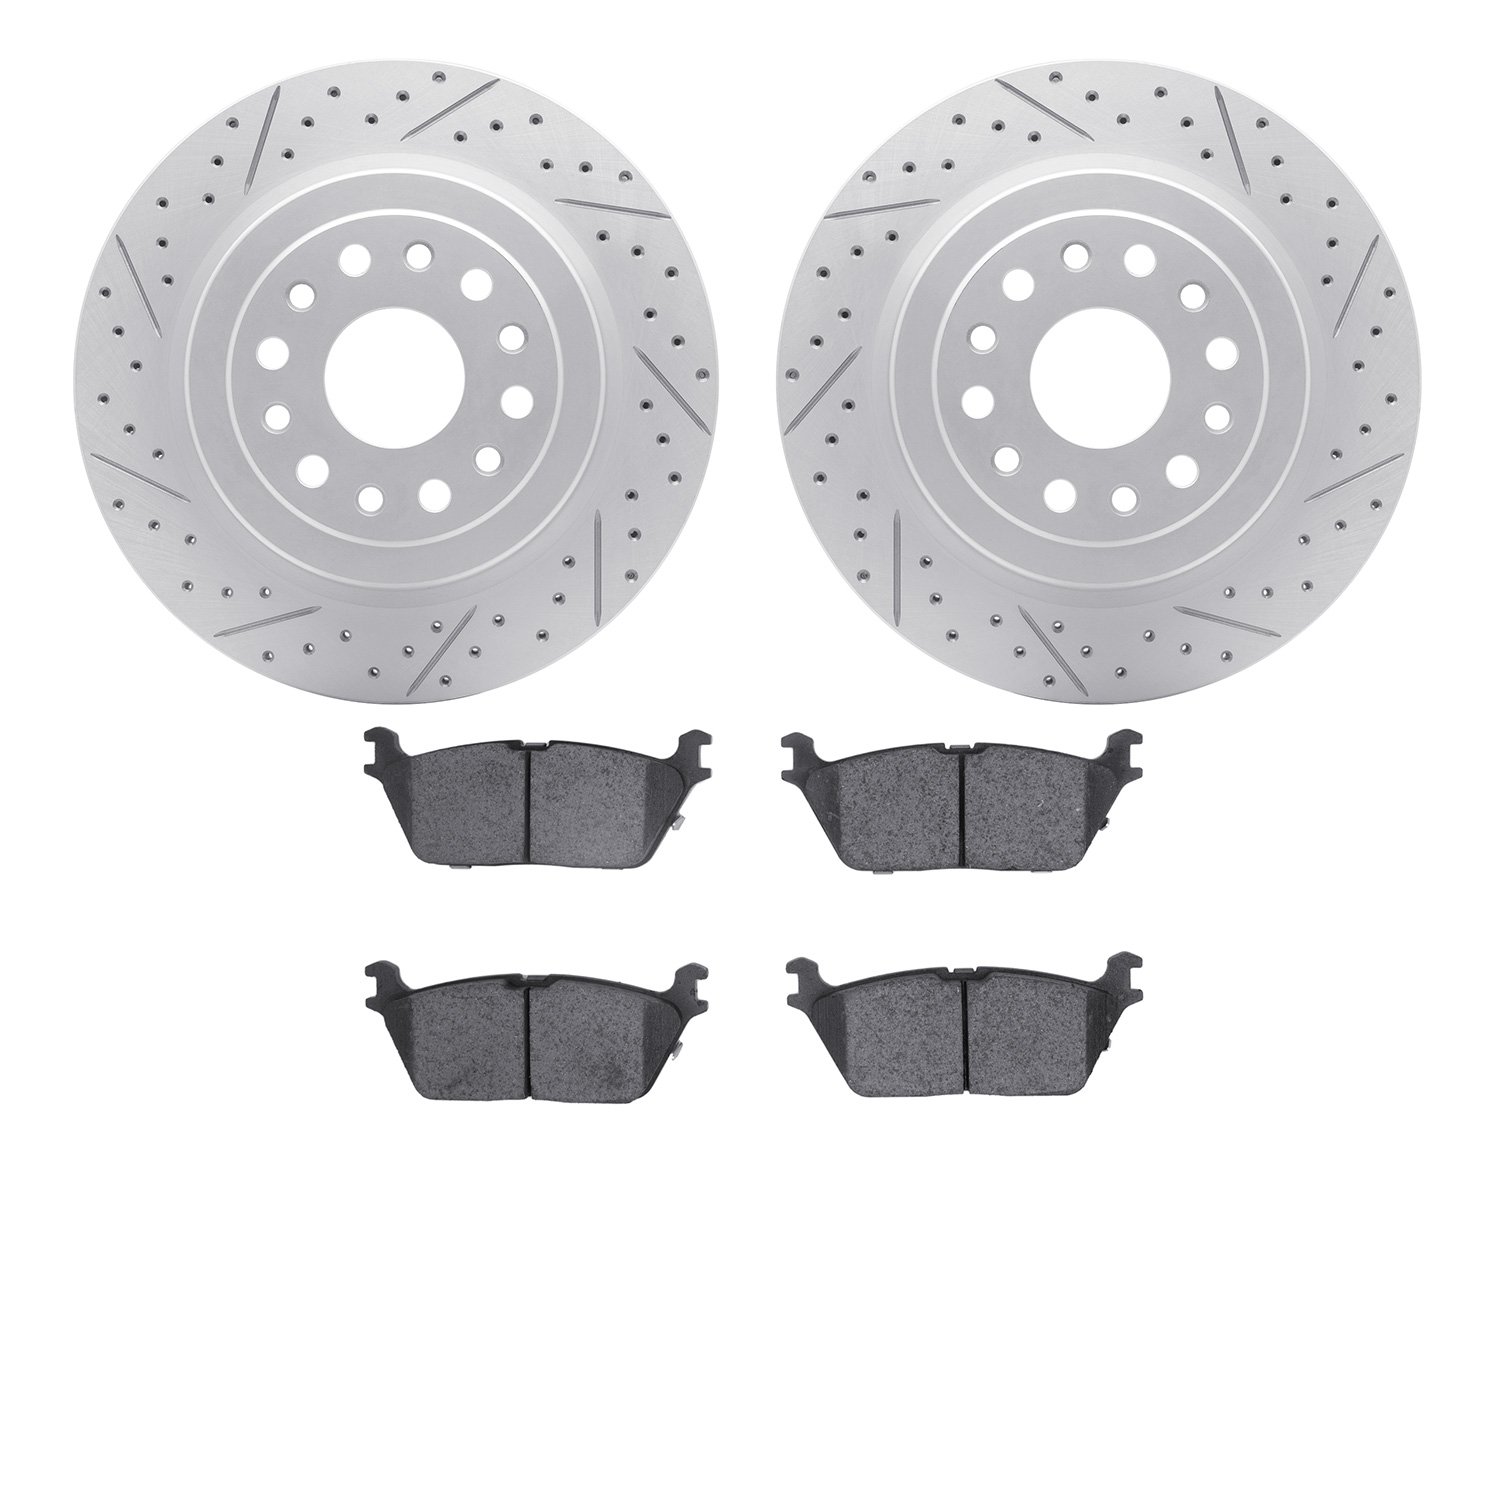 2502-40081 Geoperformance Drilled/Slotted Rotors w/5000 Advanced Brake Pads Kit, Fits Select Mopar, Position: Rear